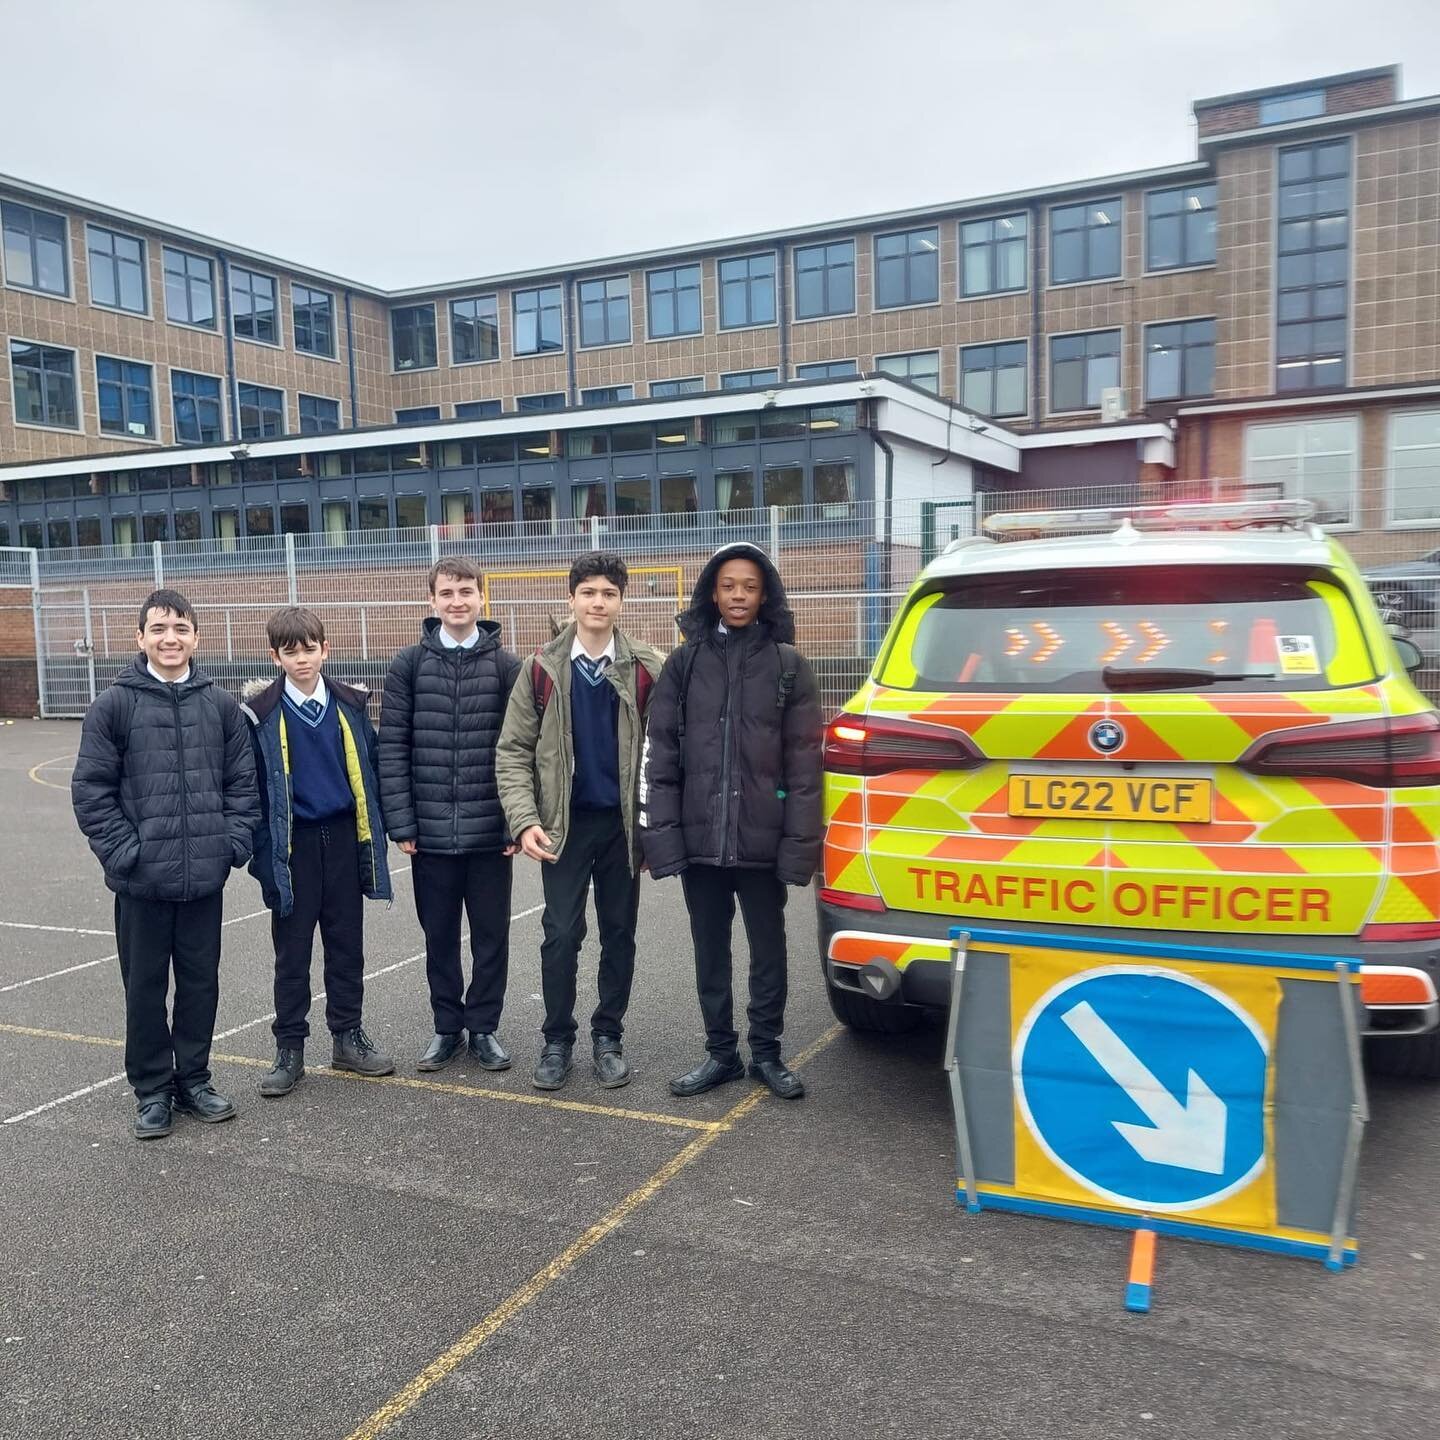 Our year 10 pupils have had a really productive day today; as part of our careers &amp; work experience activities we had a number of trainers in school from the @nationalhways (National Highways) organisation. They learned about the various career o